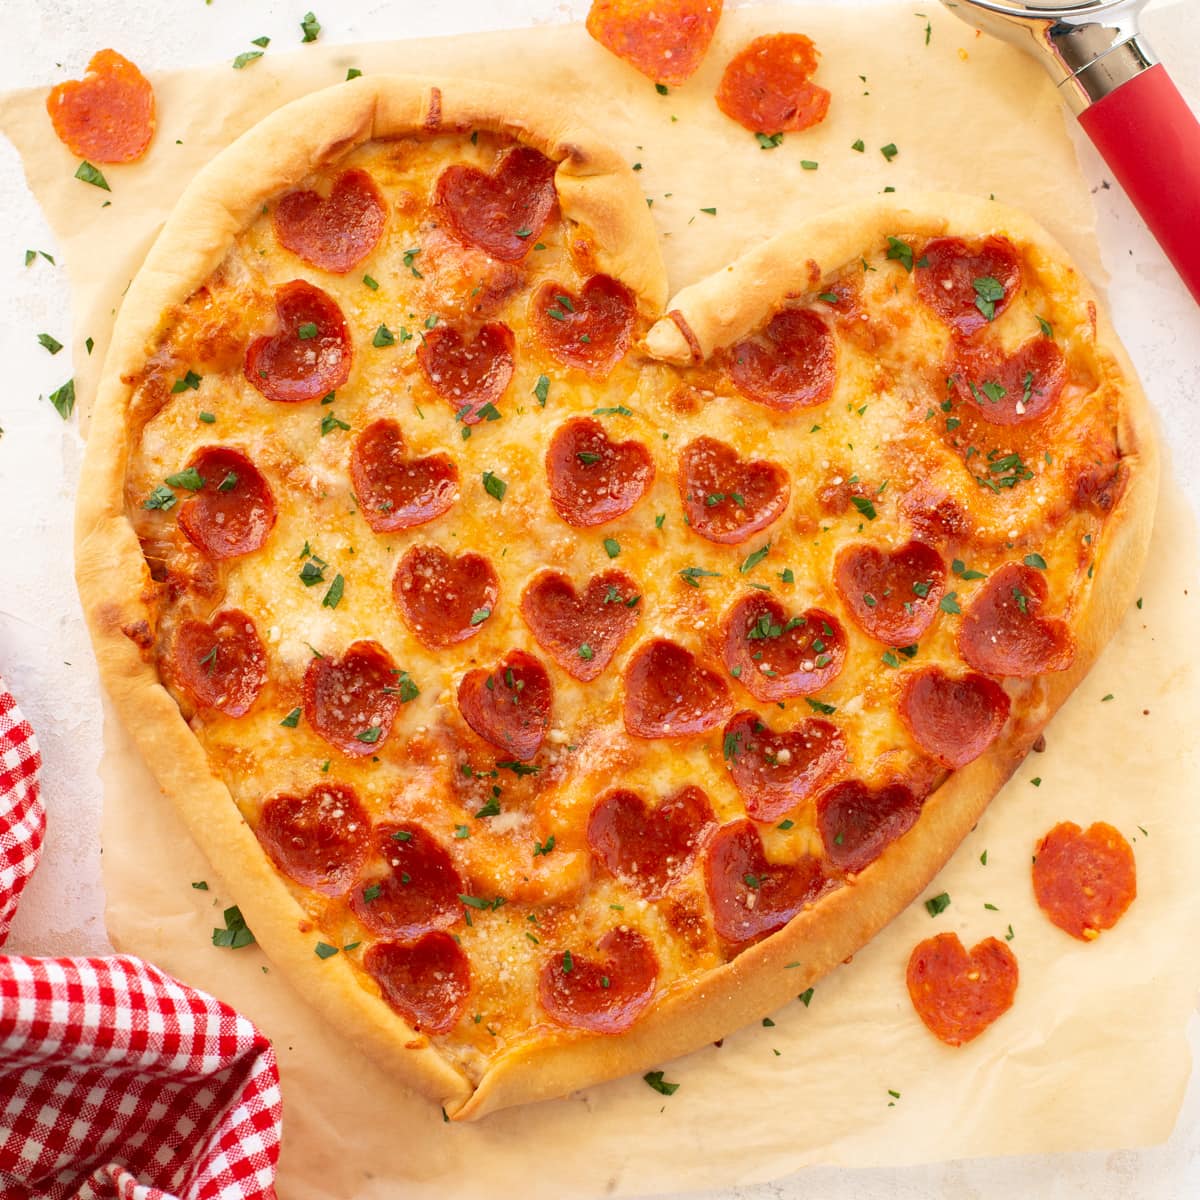 Heart Shaped Pizza displayed on a cutting board.